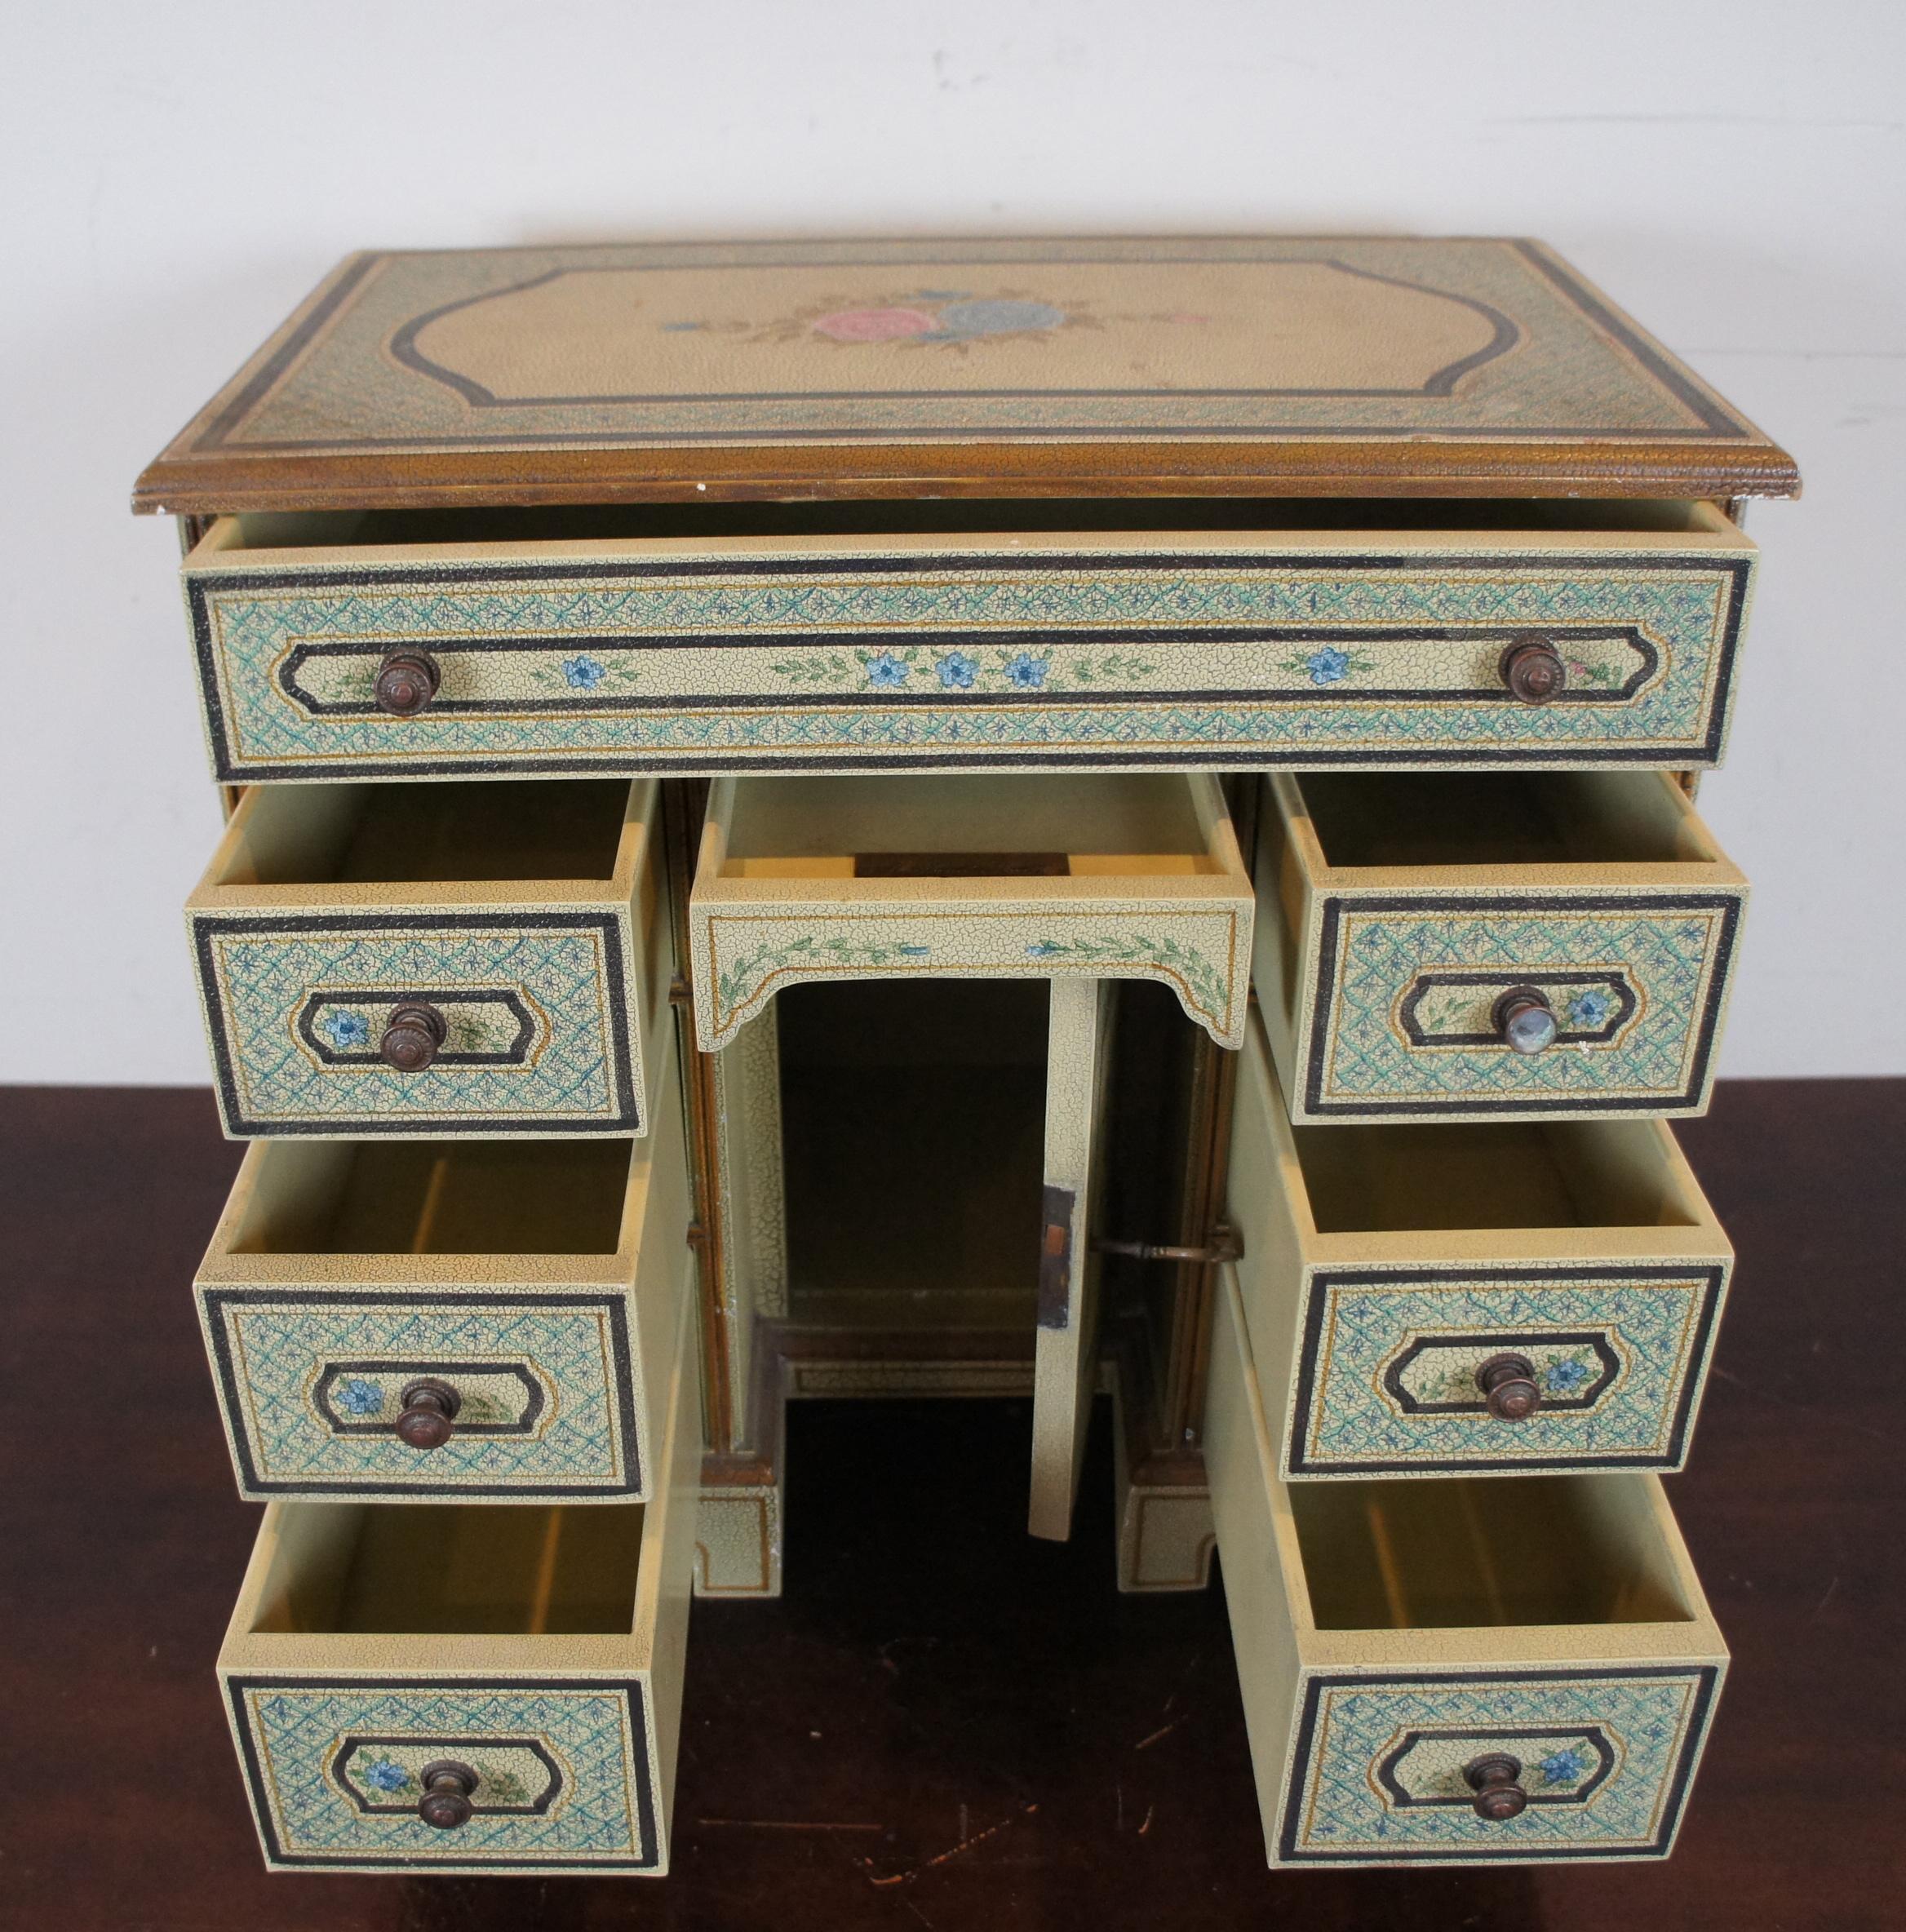 Vintage Maitland Smith Miniature Knee Hole Desk Keepsake Jewelry Box Chest In Good Condition For Sale In Dayton, OH